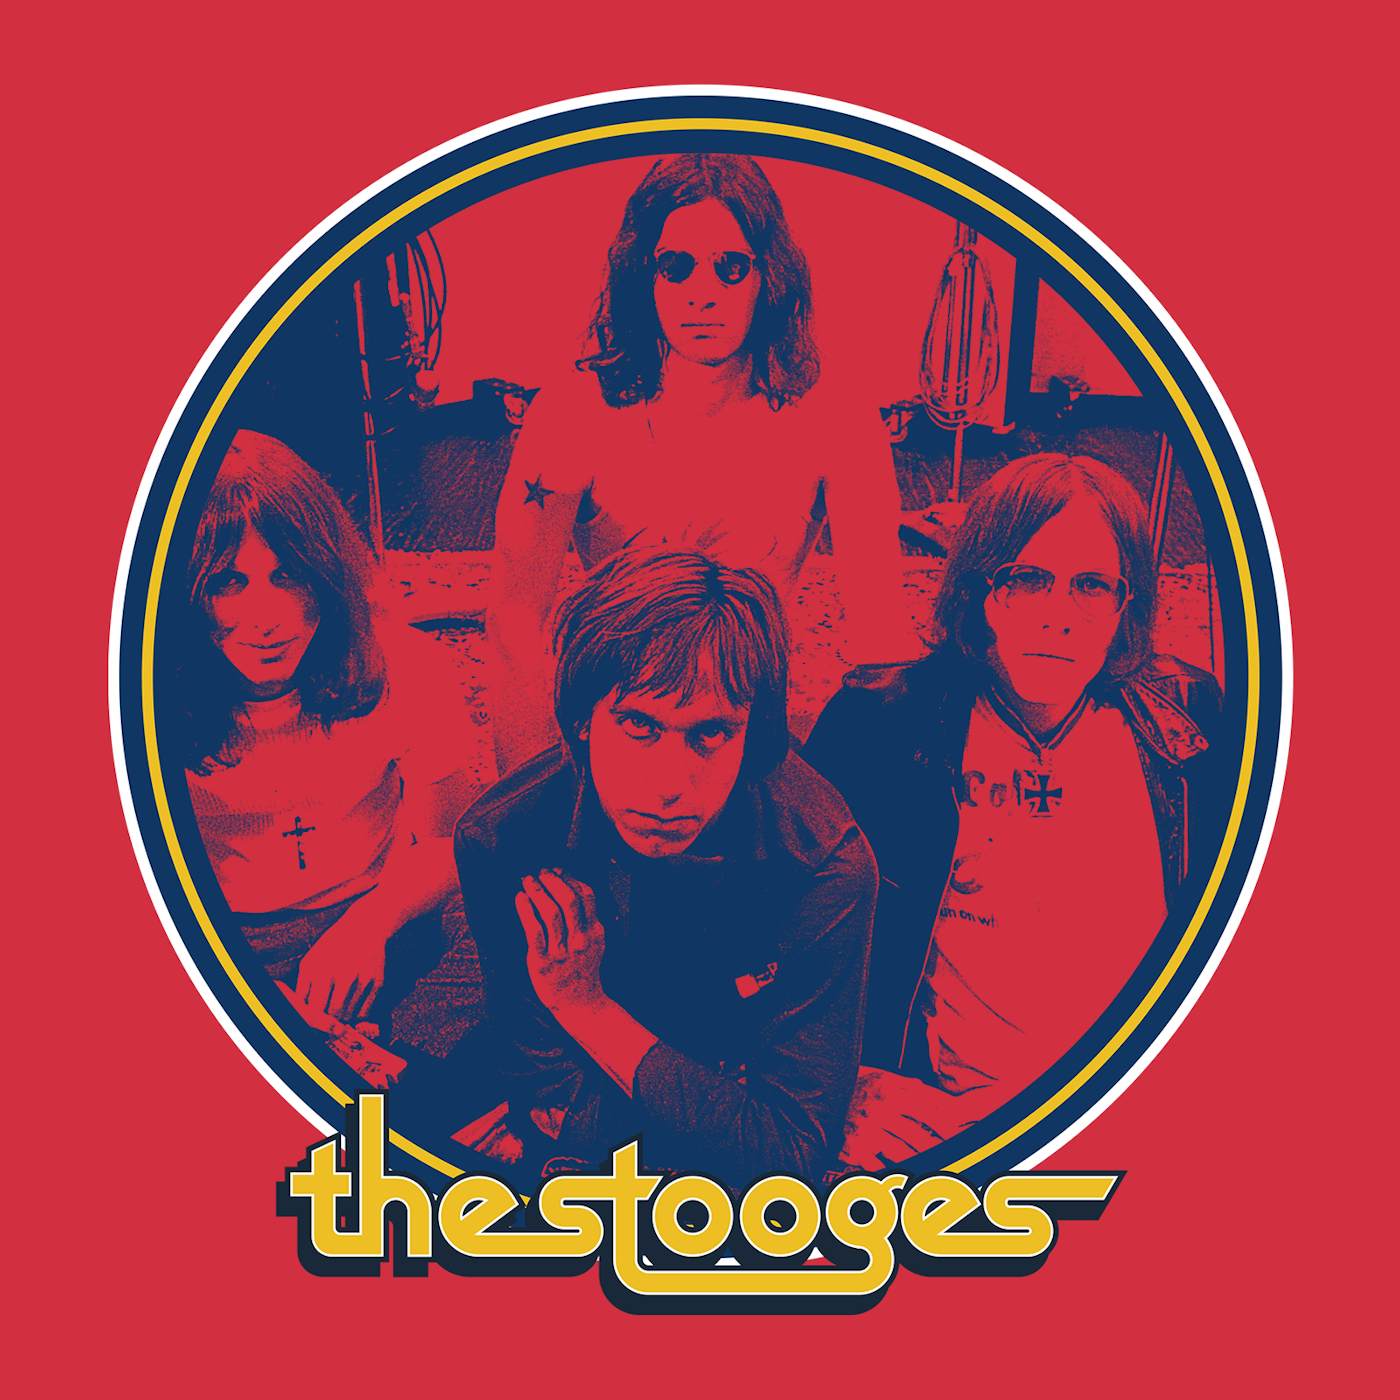 The Stooges T-Shirt | Group Image Shirt